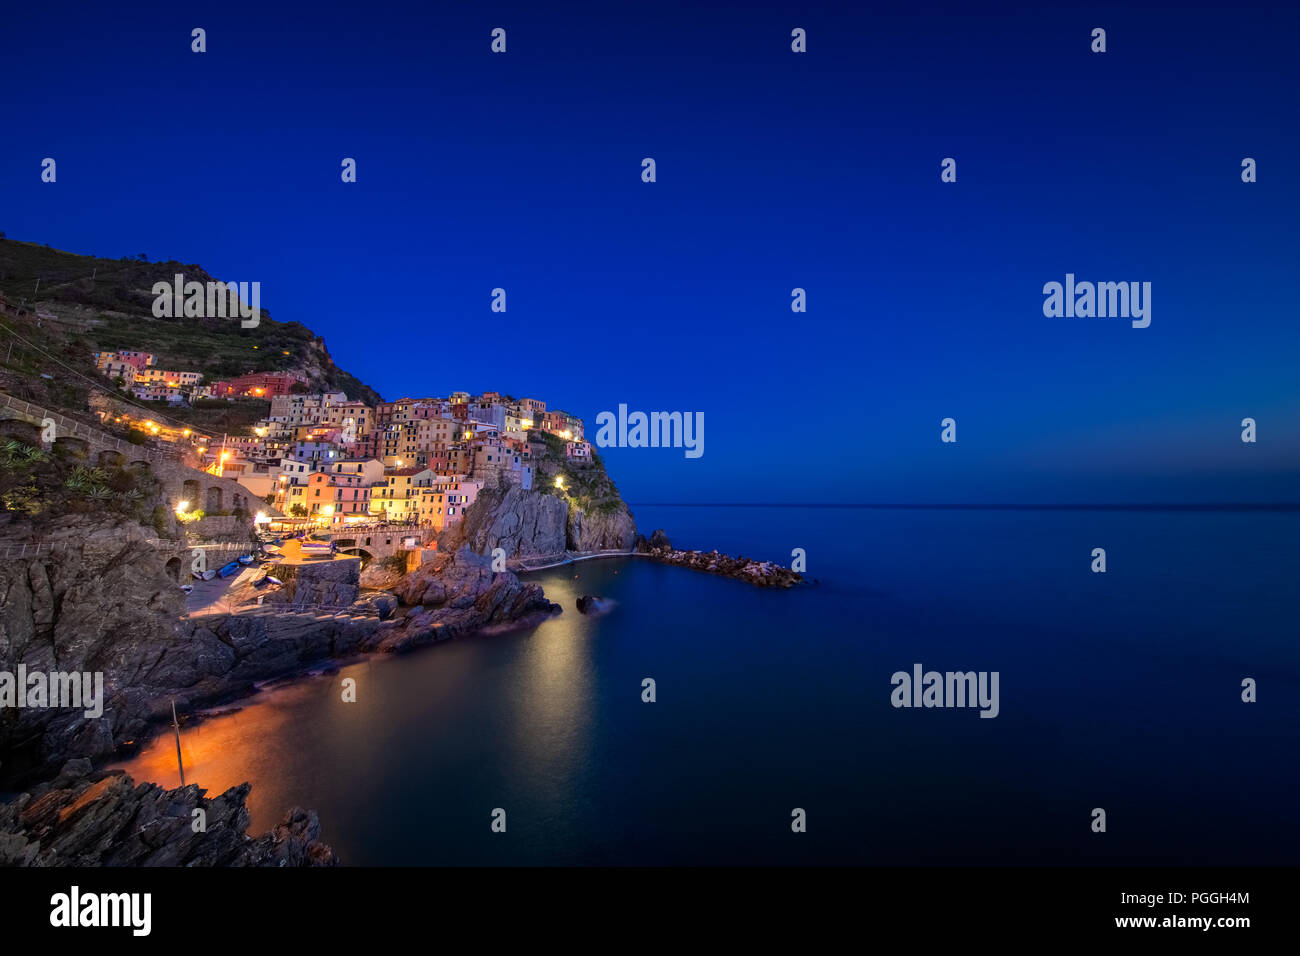 The town of Manarola, with lights on, built upon a cliff above the Mediterranean Sea and one of the five cinque terre villages near La Spezia, Italy. Stock Photo